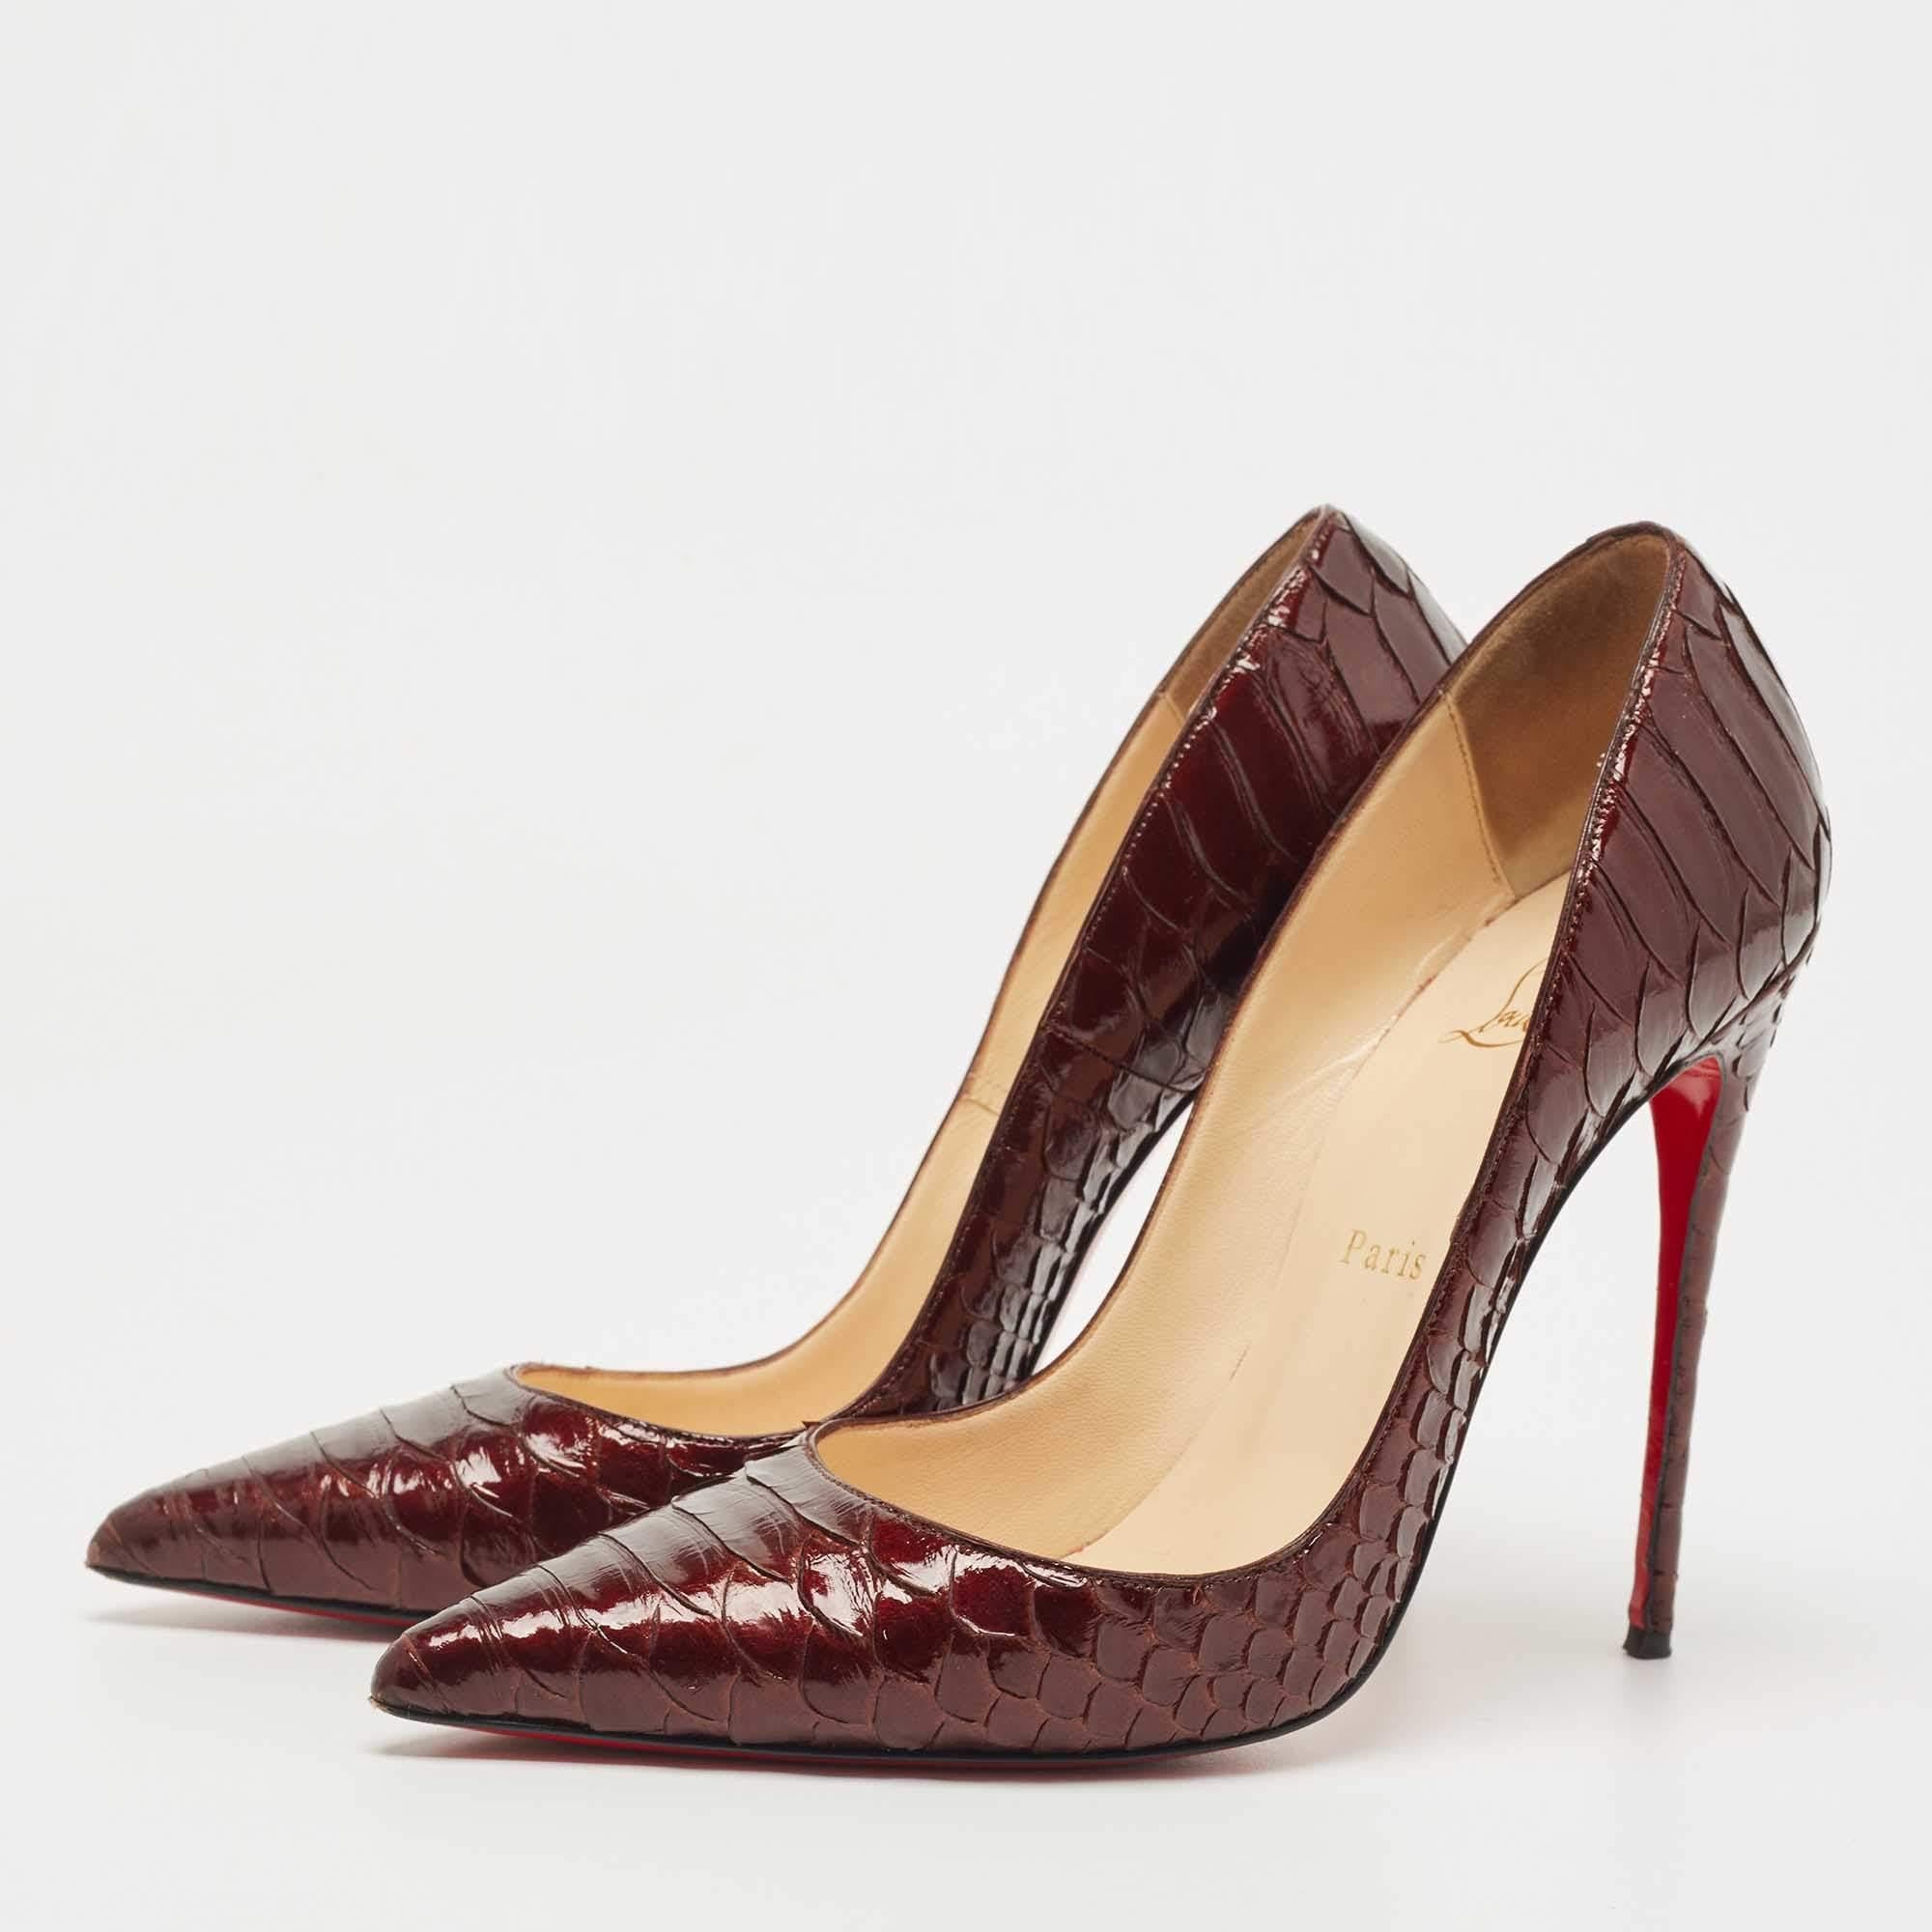 Make a statement with these Christian Louboutin So Kate pumps for women. Impeccably crafted, these chic heels offer both fashion and comfort, elevating your look with each graceful step.

